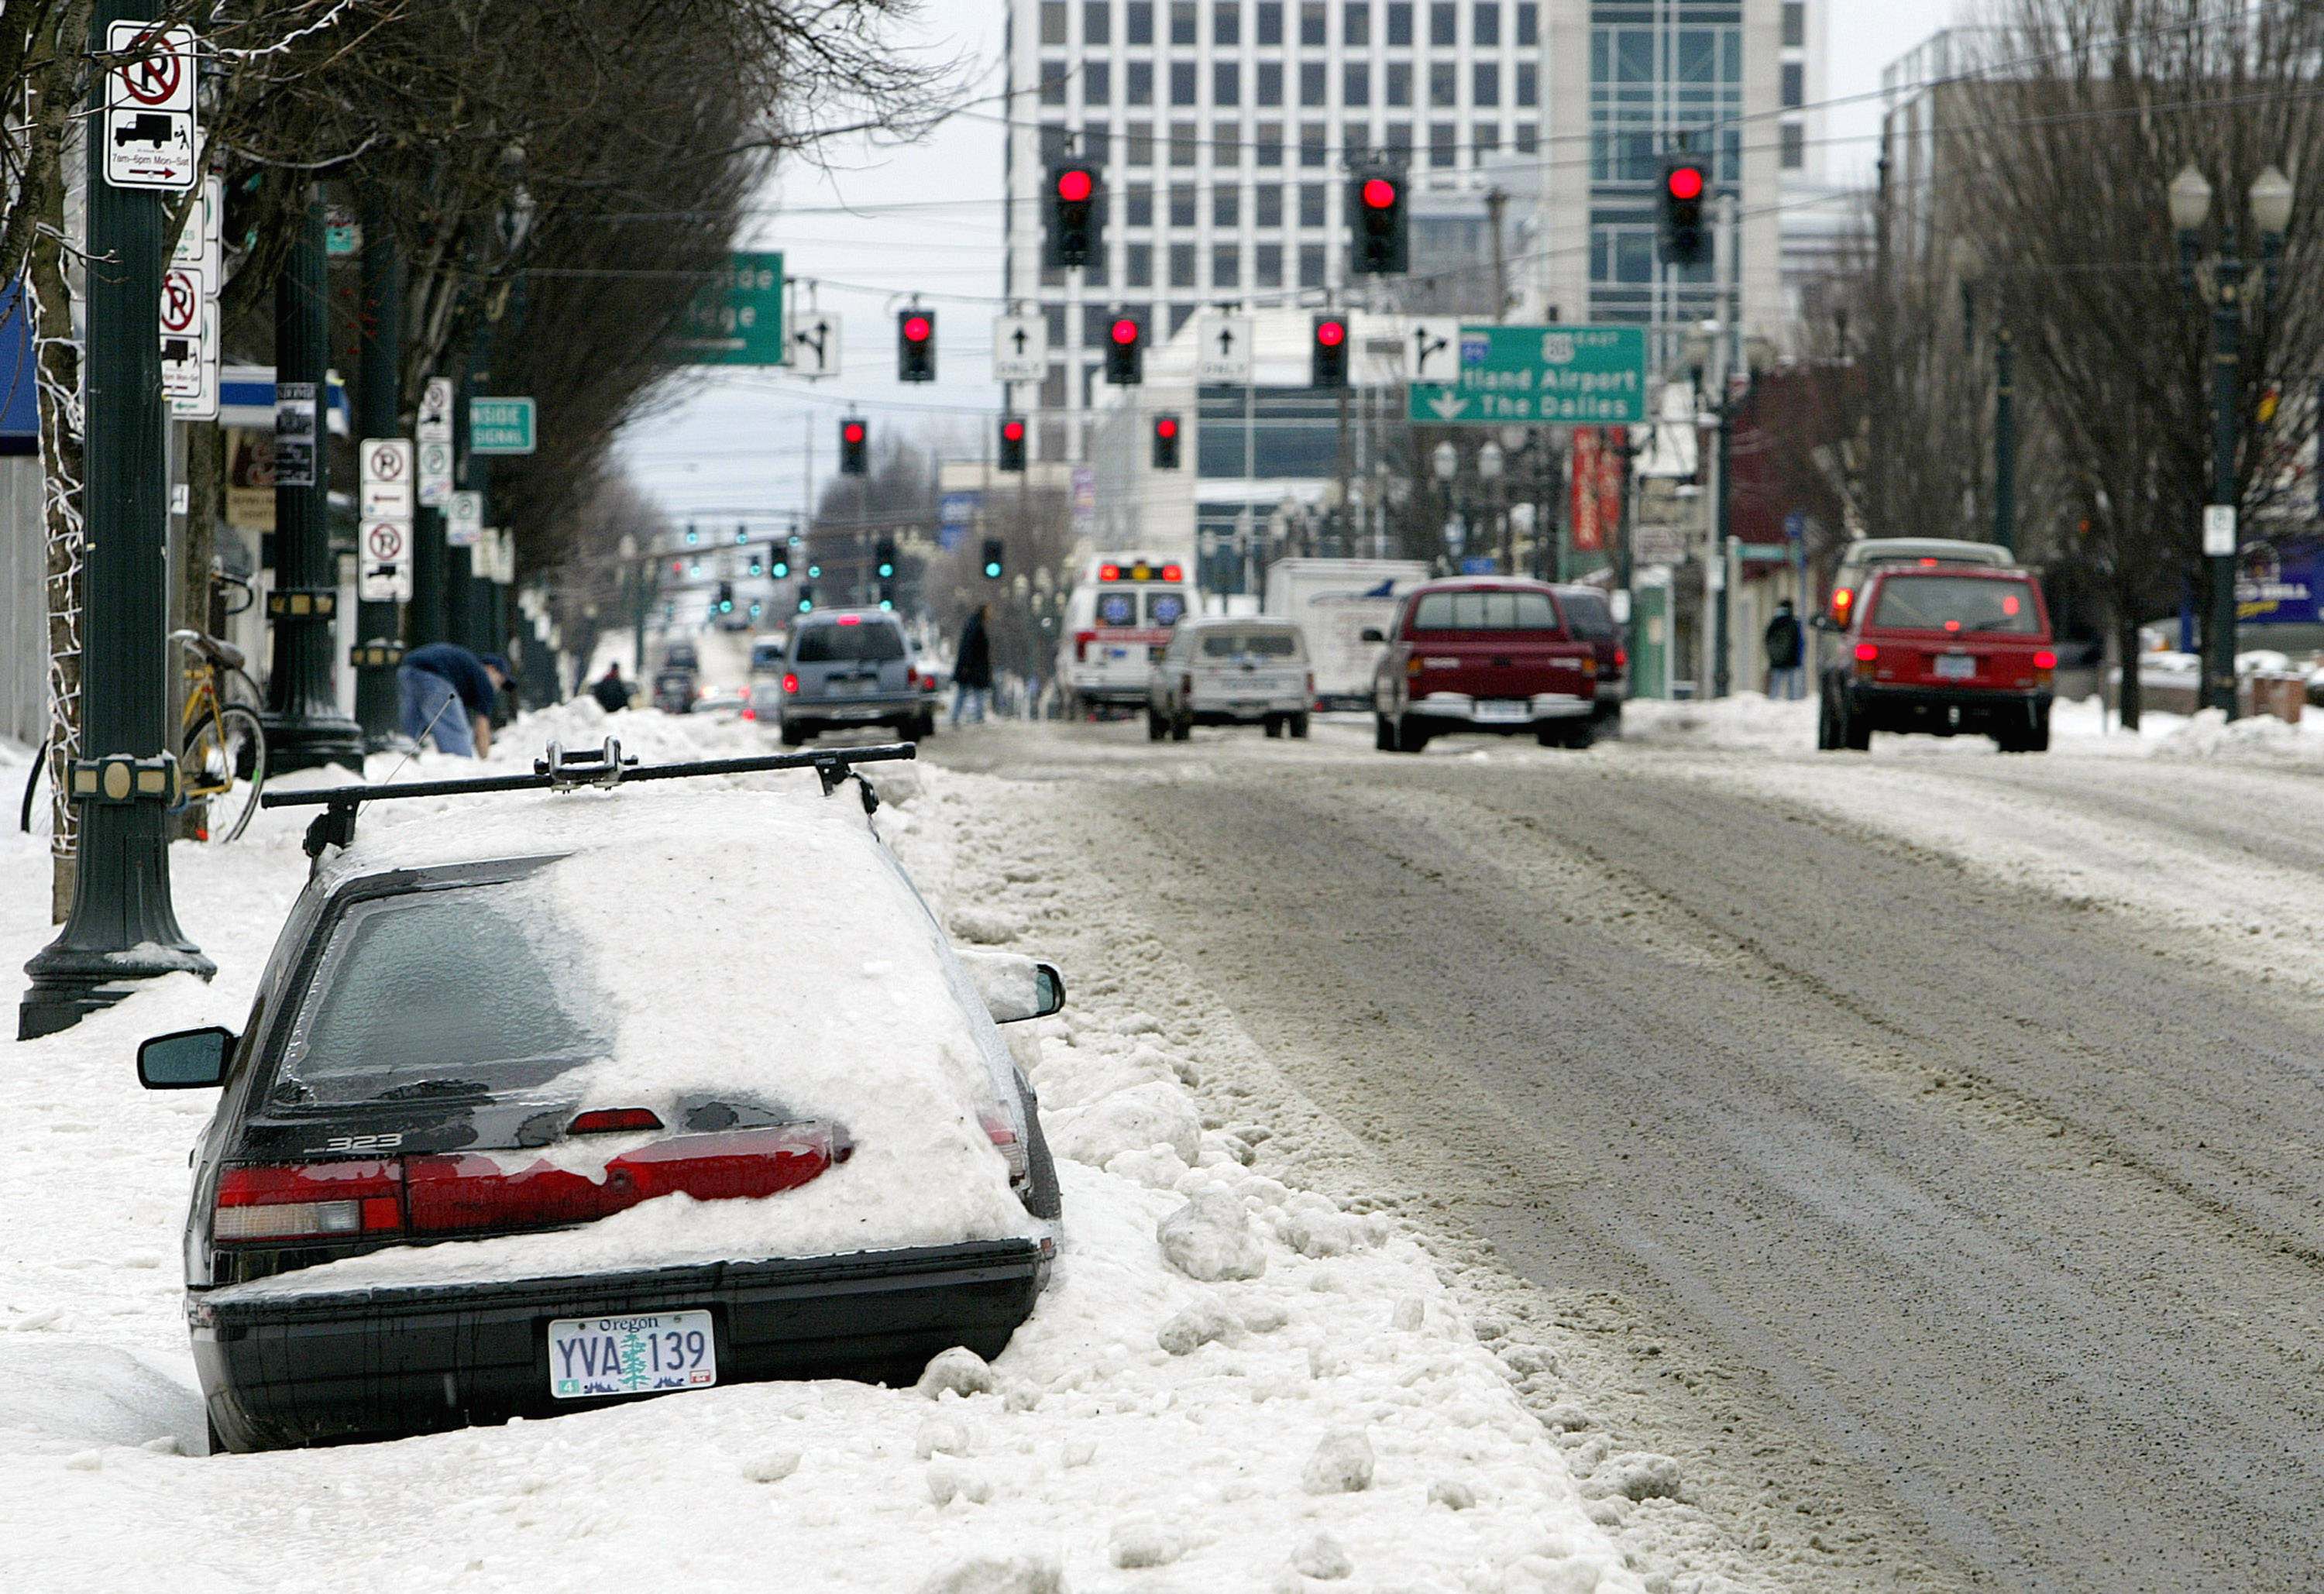 For First Time, Measurable Snowfall Hits Portland, Oregon, in April